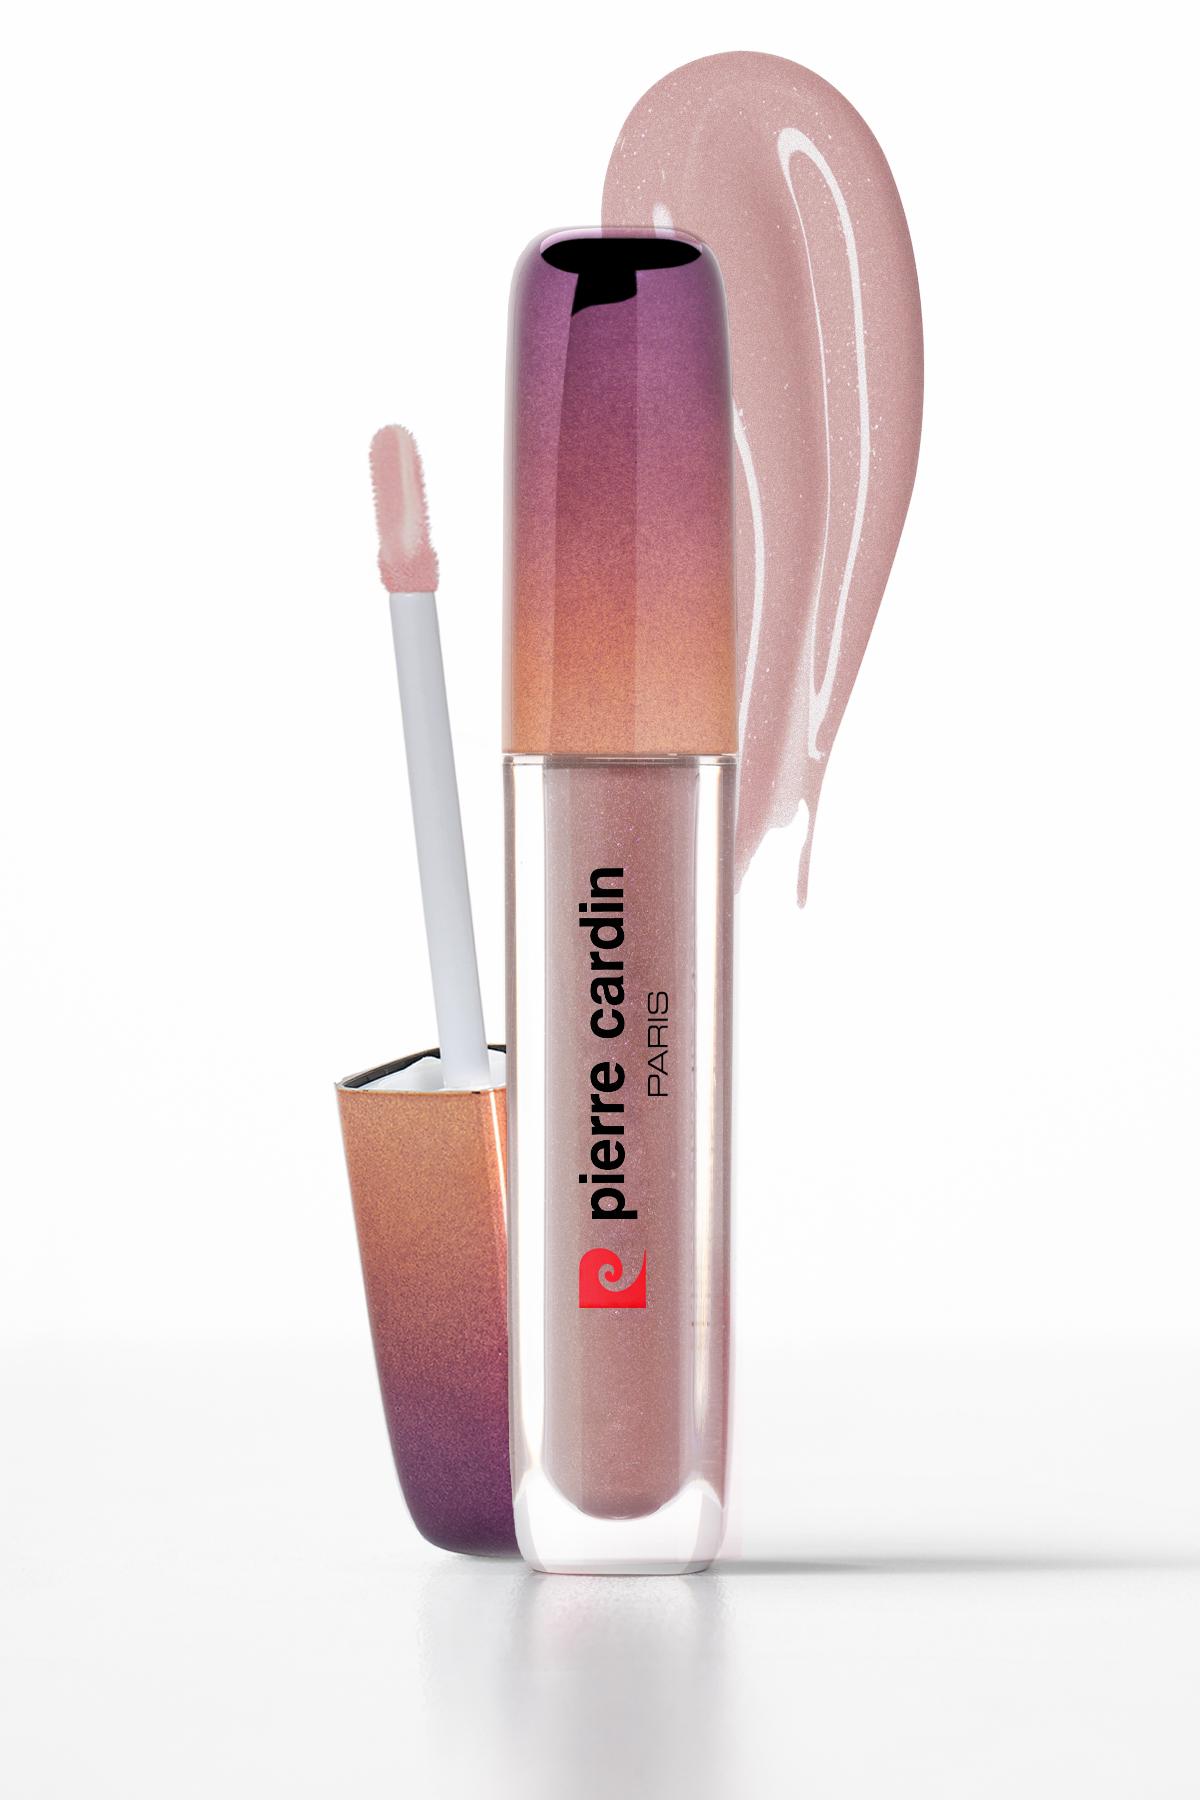 PIERRE CARDIN Сјај за усни - Shimmering Lip Gloss, 708 Cold Taupe, 5мл.